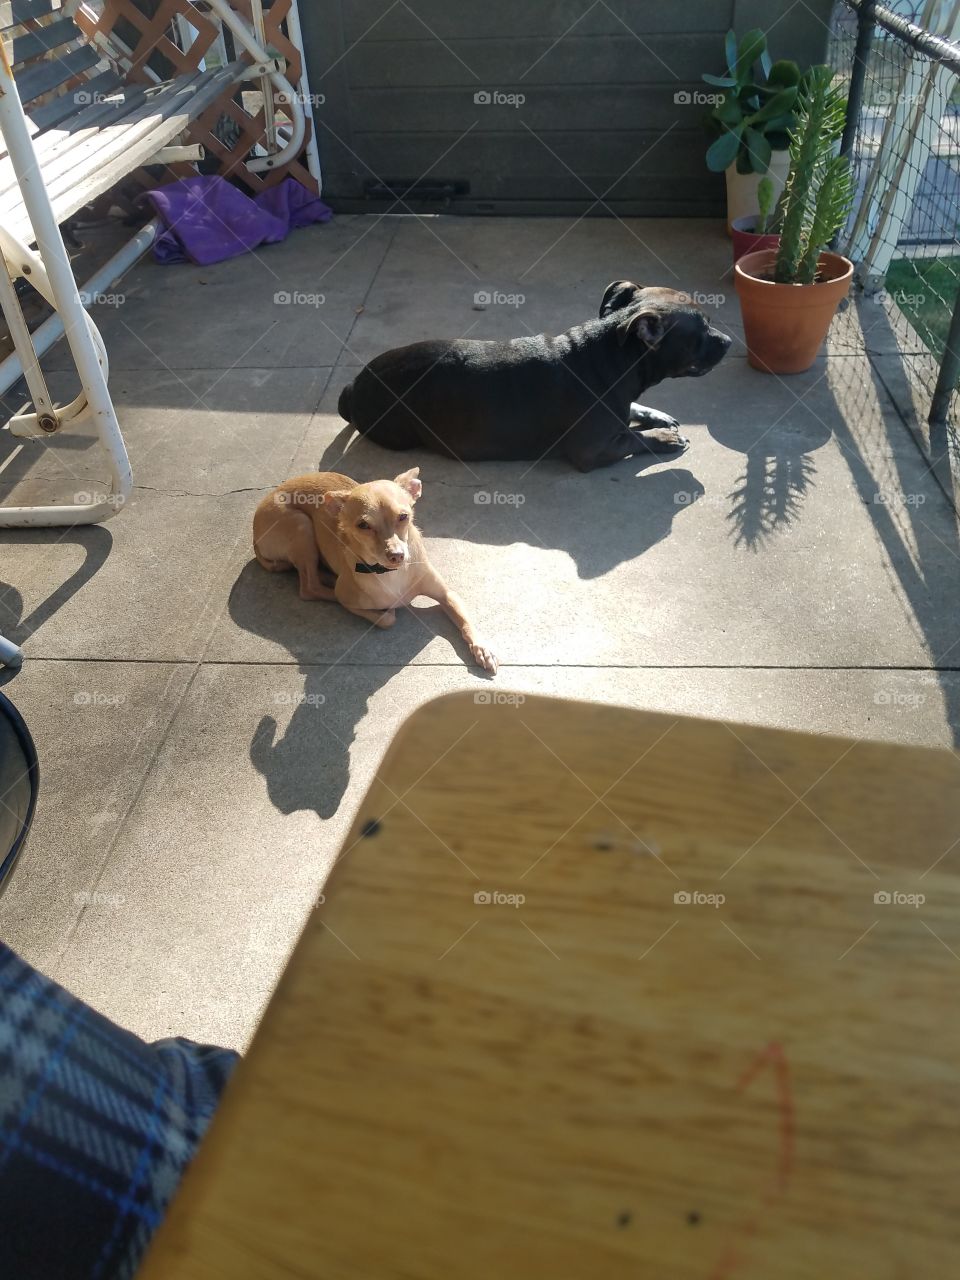 The dogs love the sun outside on the porch.